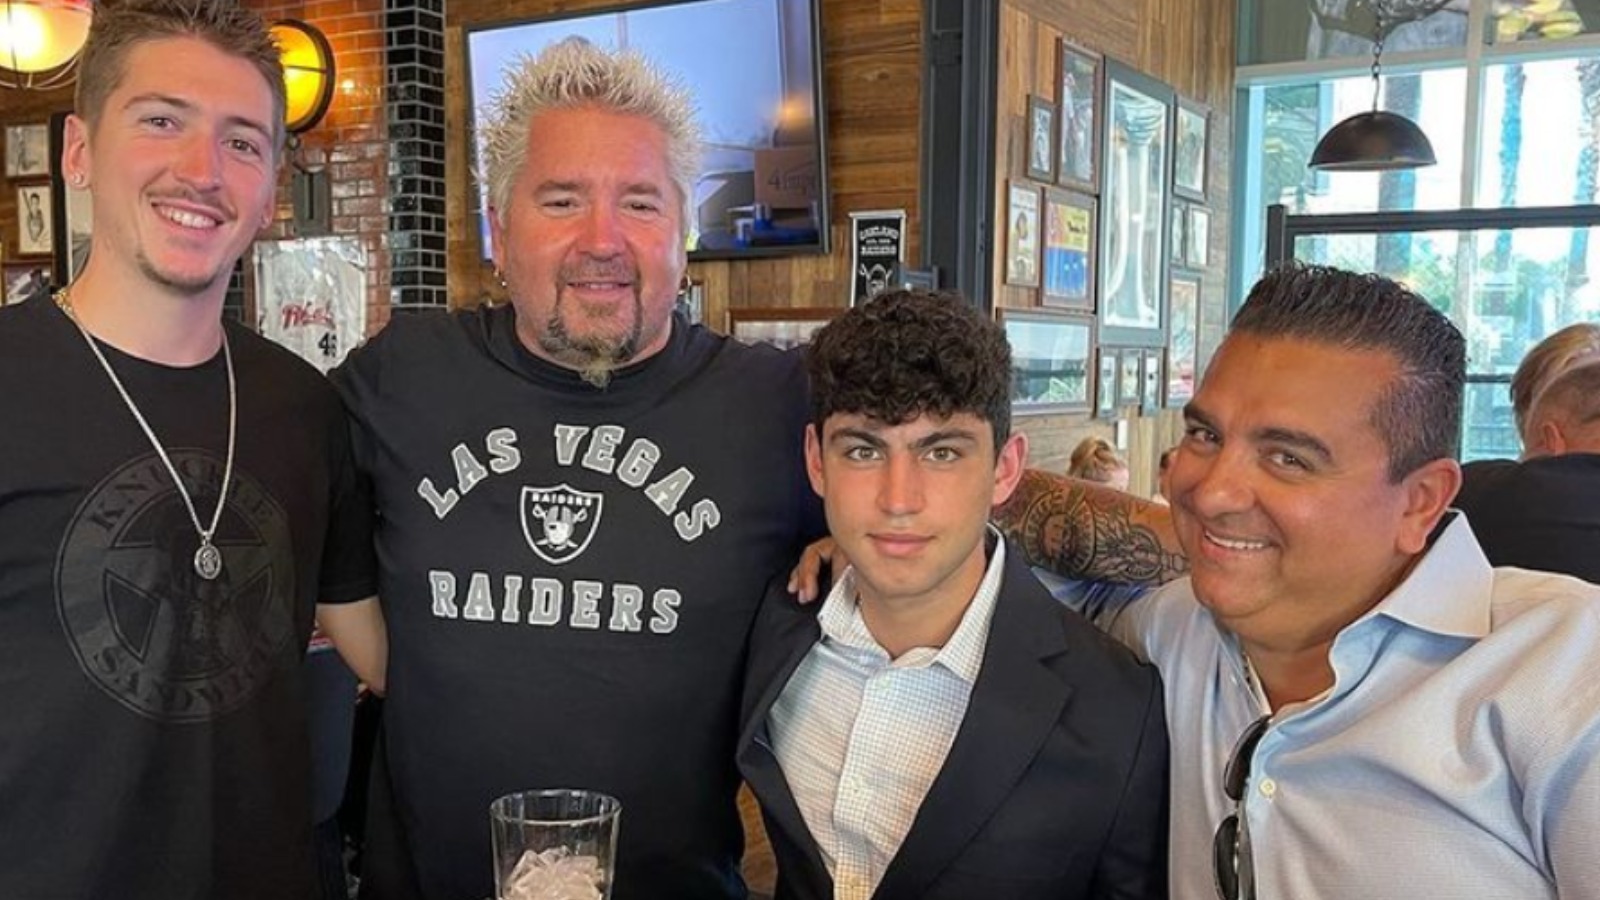 Buddy Valastro and Guy Fieri Have Fun Father-Son Meetup in Las Vegas